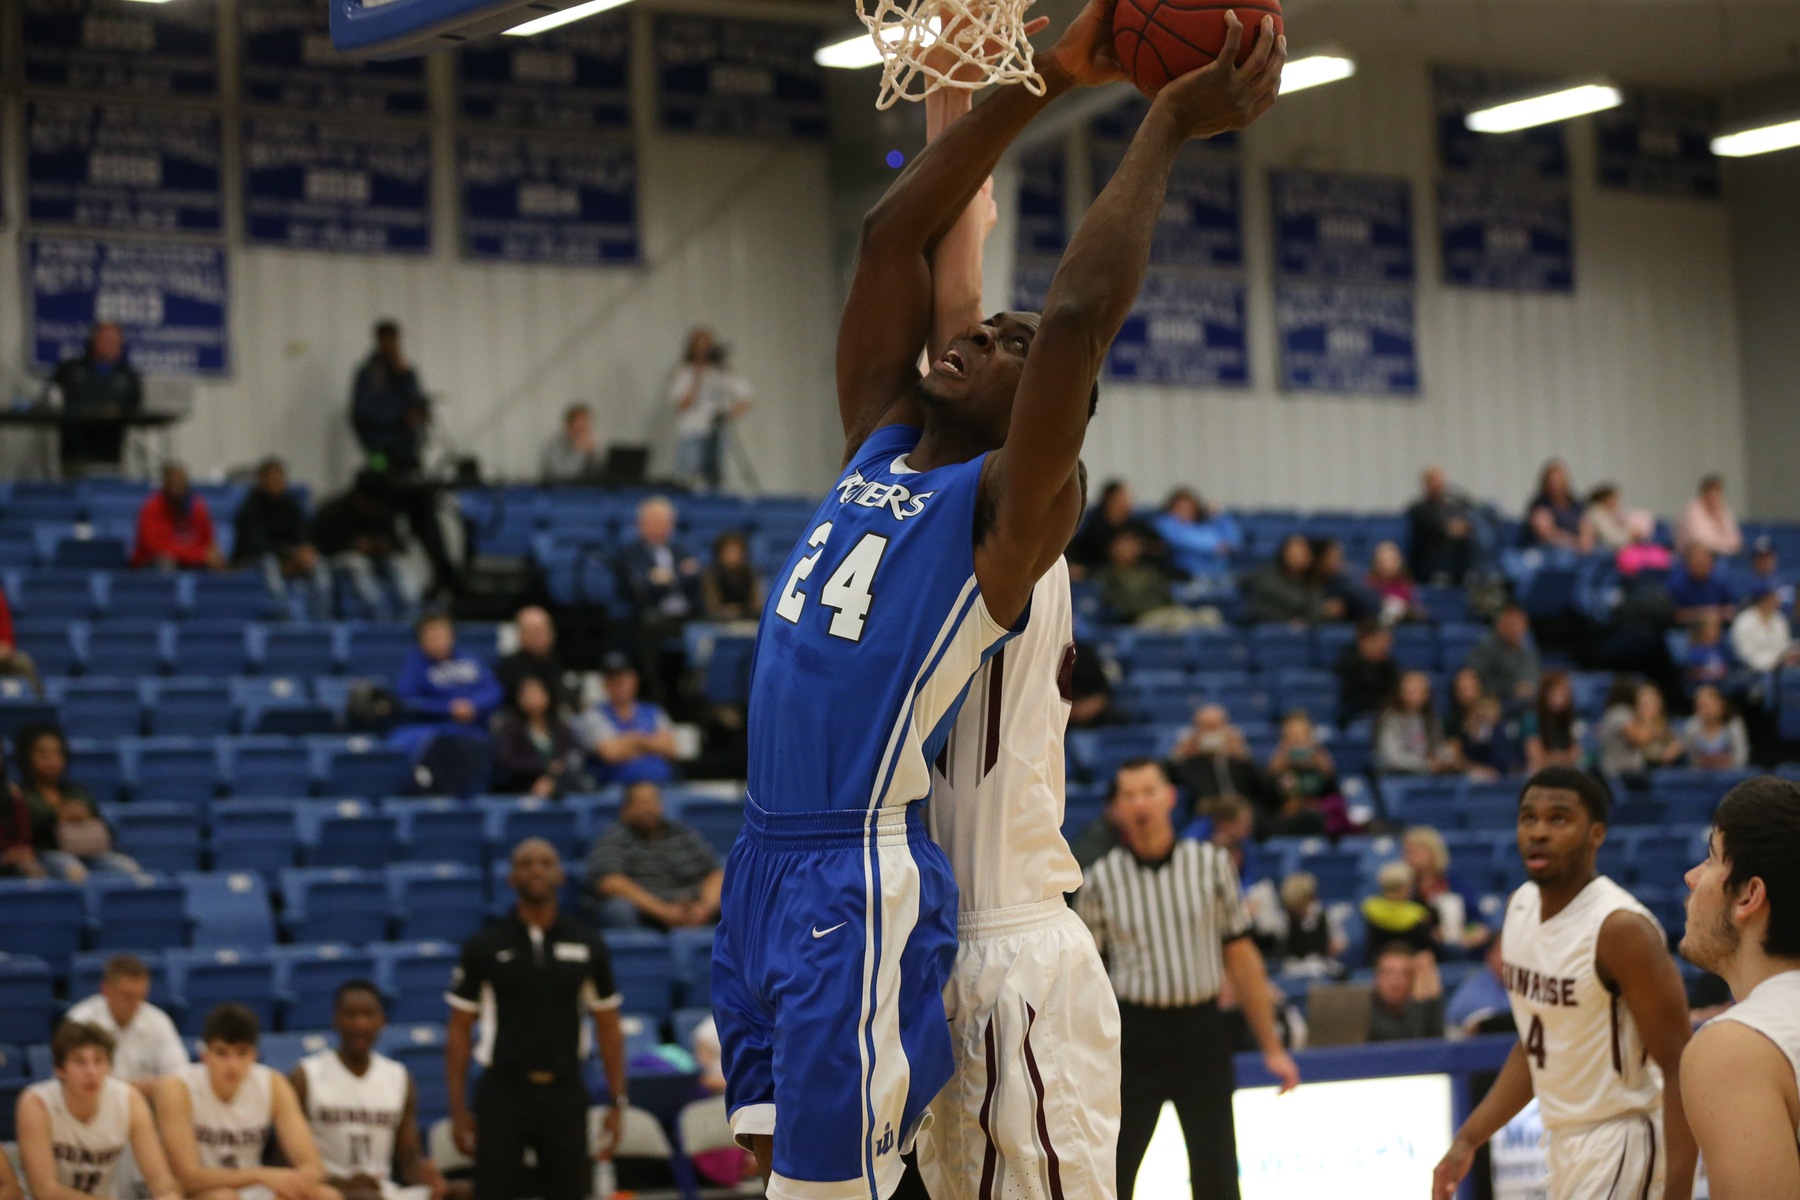 Iowa Western's Emmanuel Ugboh scored 12 points and grabbed 7 rebounds in only 17 minutes of foul plagued action Friday evening (11/2/18) against Sunrise Christian.